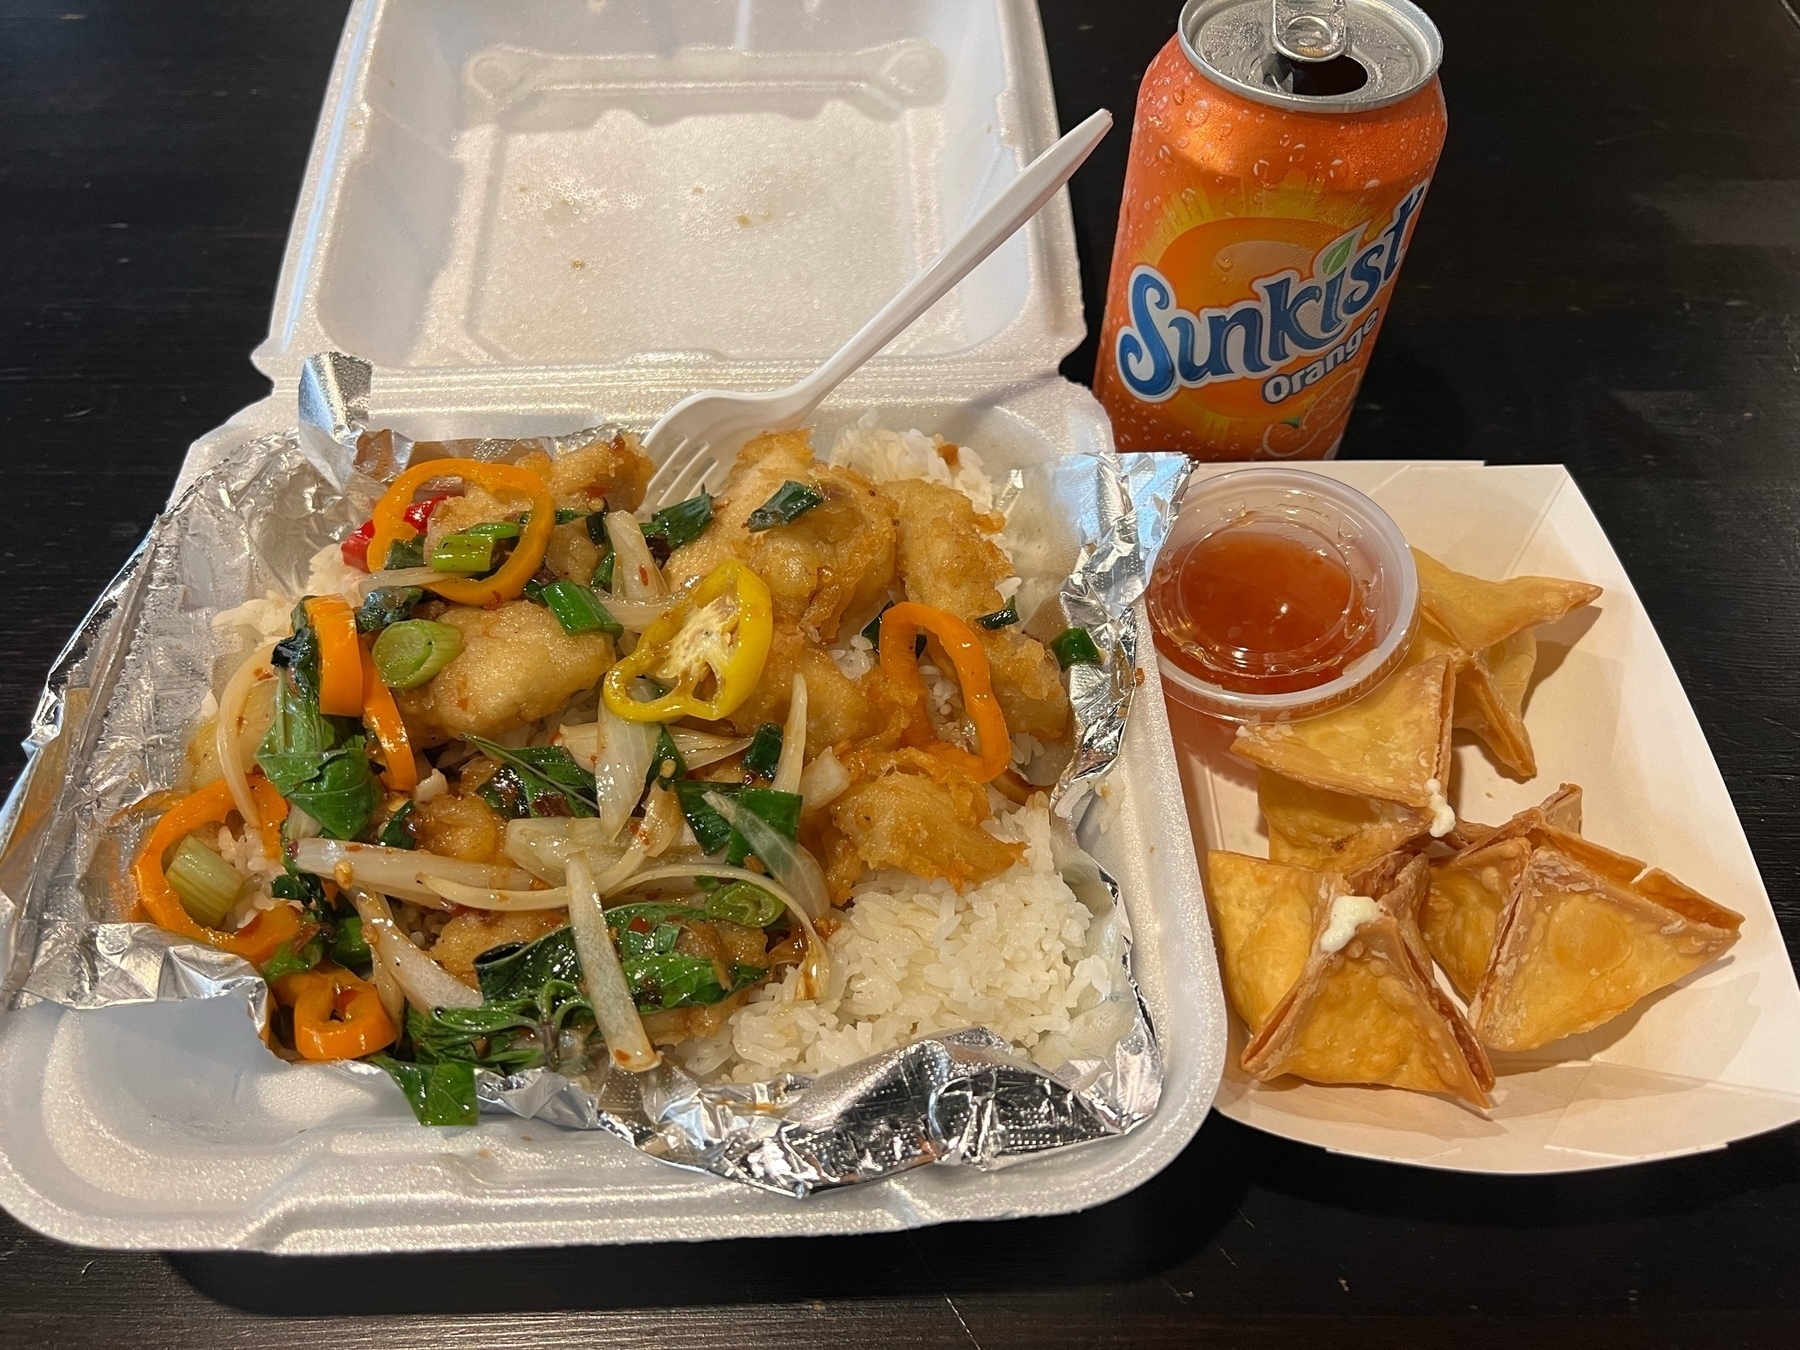 a table with a plate of crispy basil chicken, crab rangoon, and orange soda